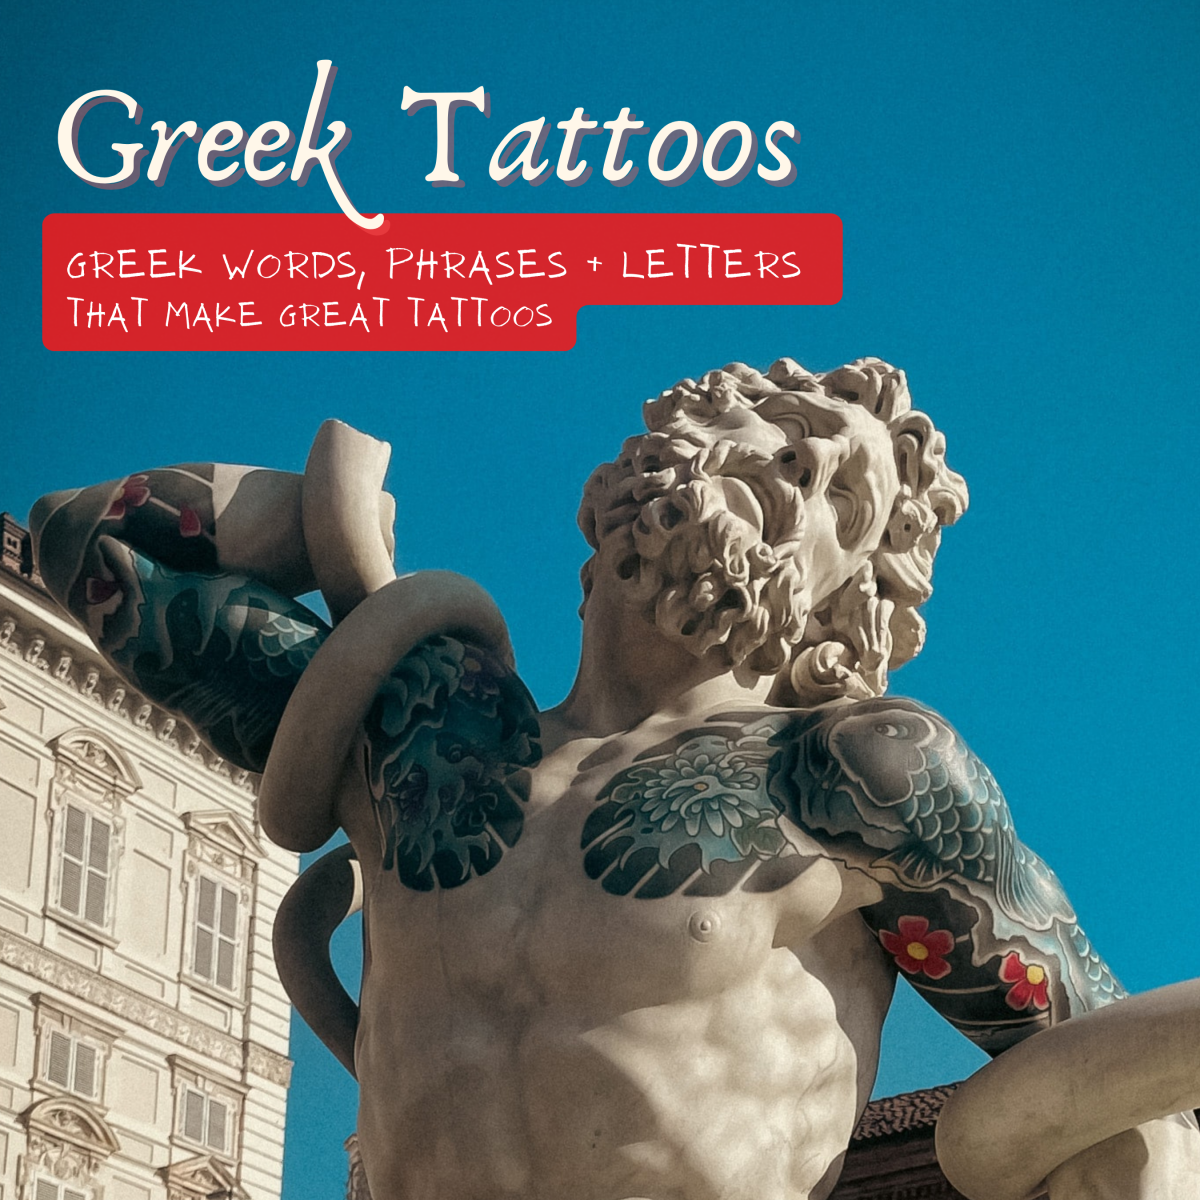 Greek words, phrases, letters, symbols, and writing that make great tattoos.